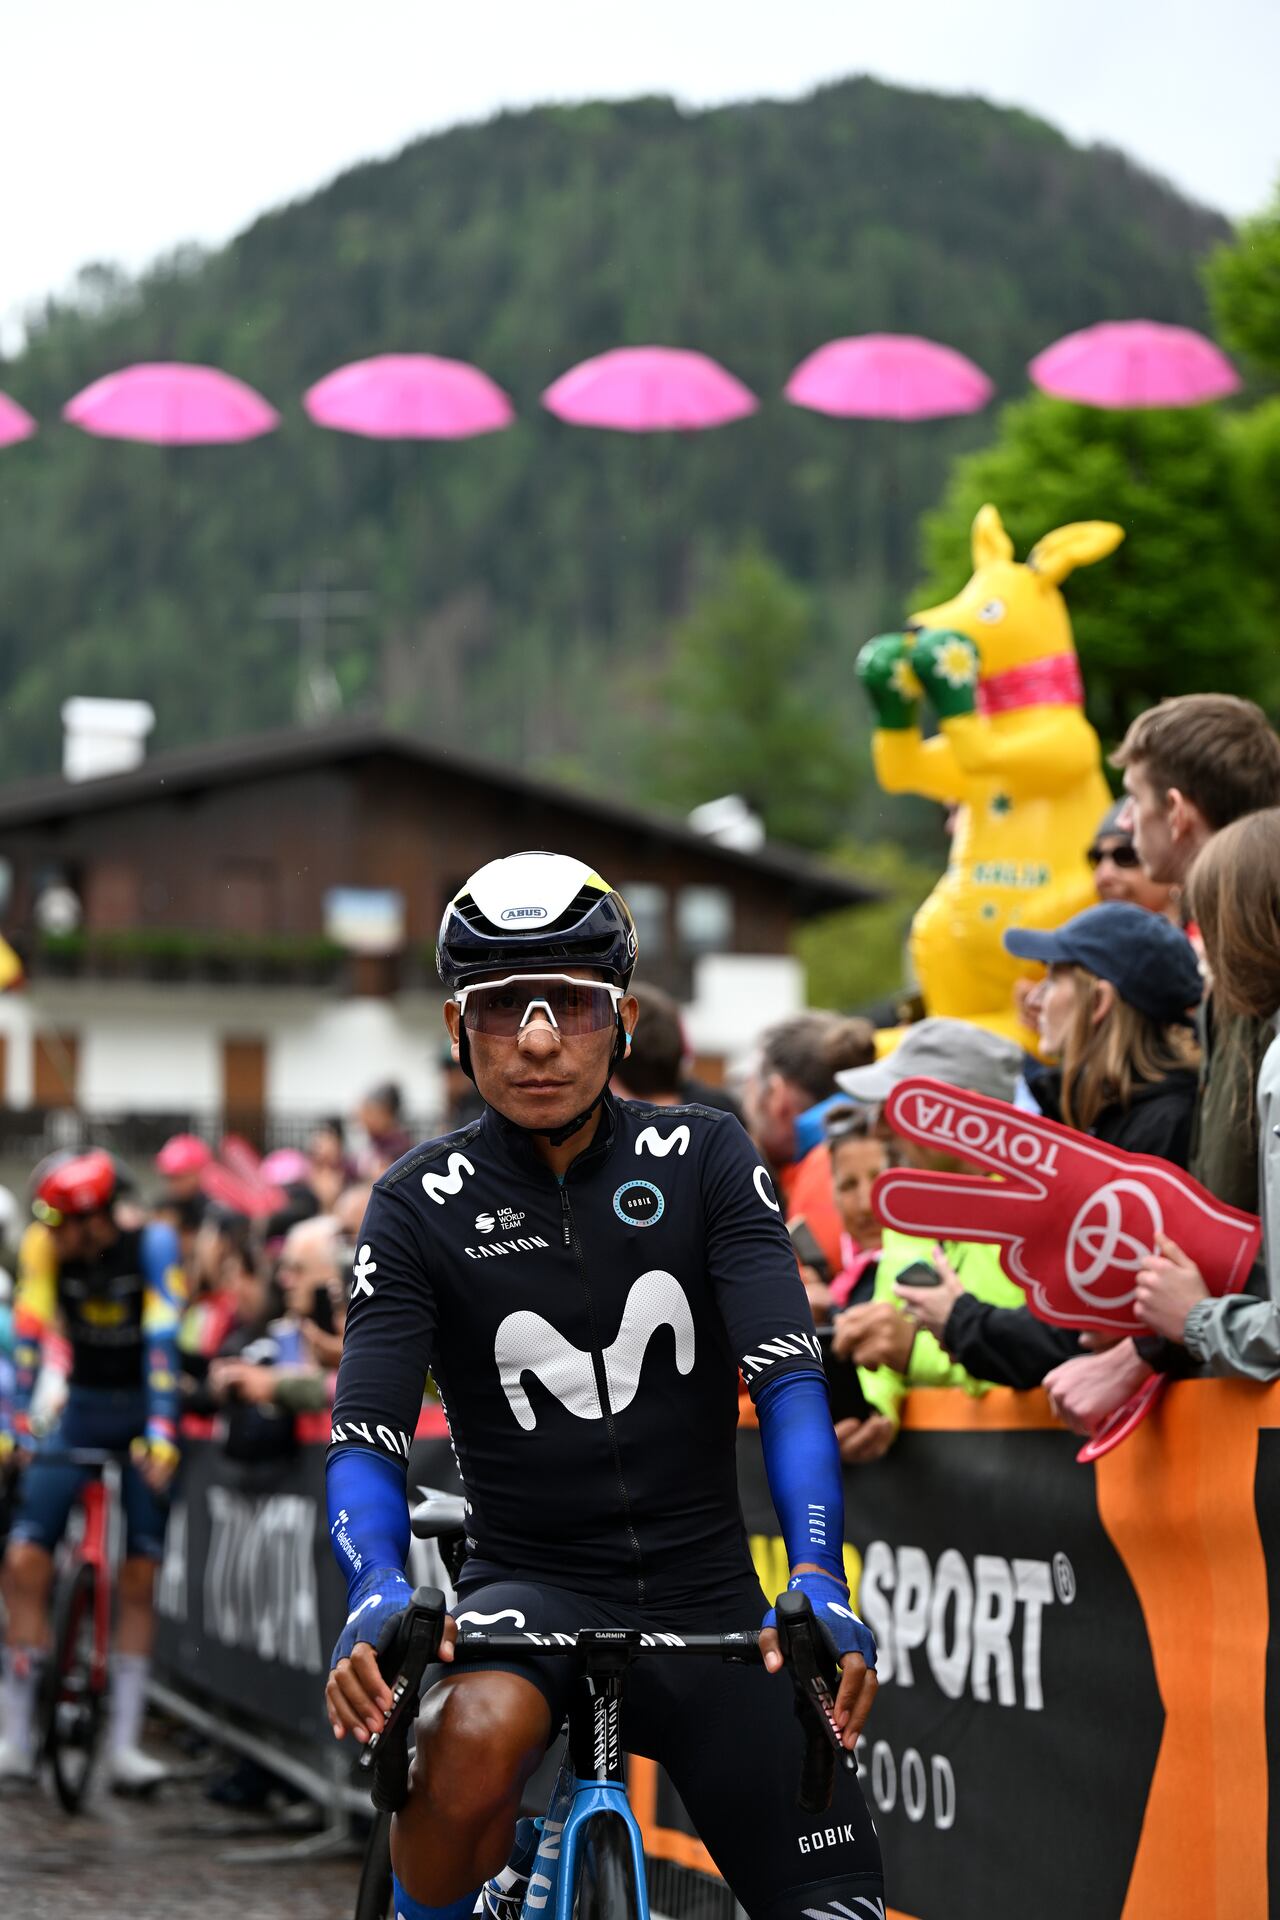 FIERA DI PRIMIERO, ITALY - MAY 23: Nairo Quintana of Colombia and Movistar Team prior to the 107th Giro d'Italia 2024, Stage 18 a 178km stage from Fiera di primiero to Padova / #UCIWT / on May 23, 2024 in Fiera di primiero, Italy. (Photo by Tim de Waele/Getty Images)